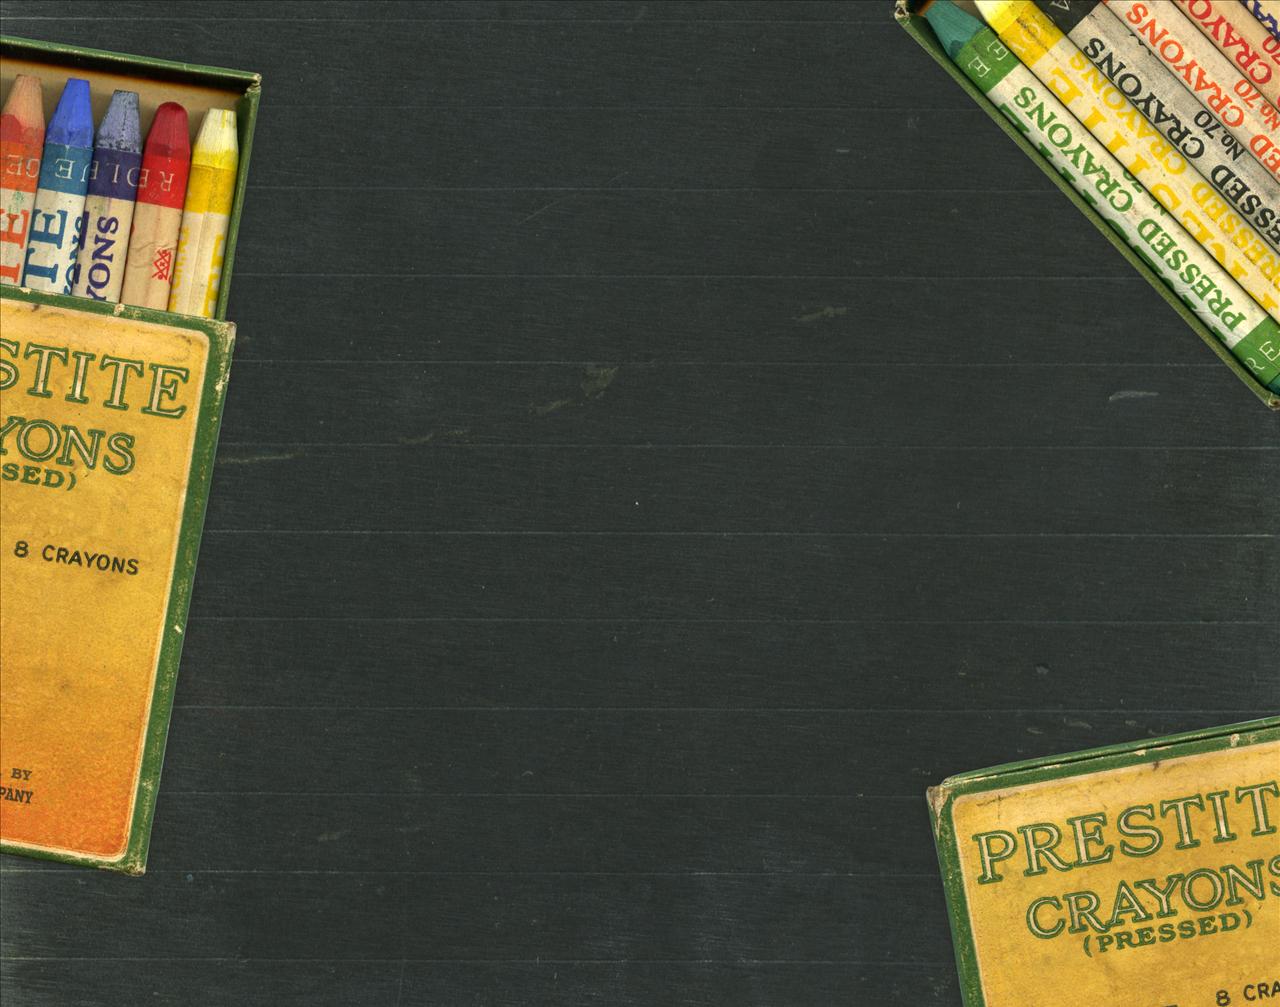 Crayons - Vintage Schoolhouse Backgrounds powerpoint backgrounds